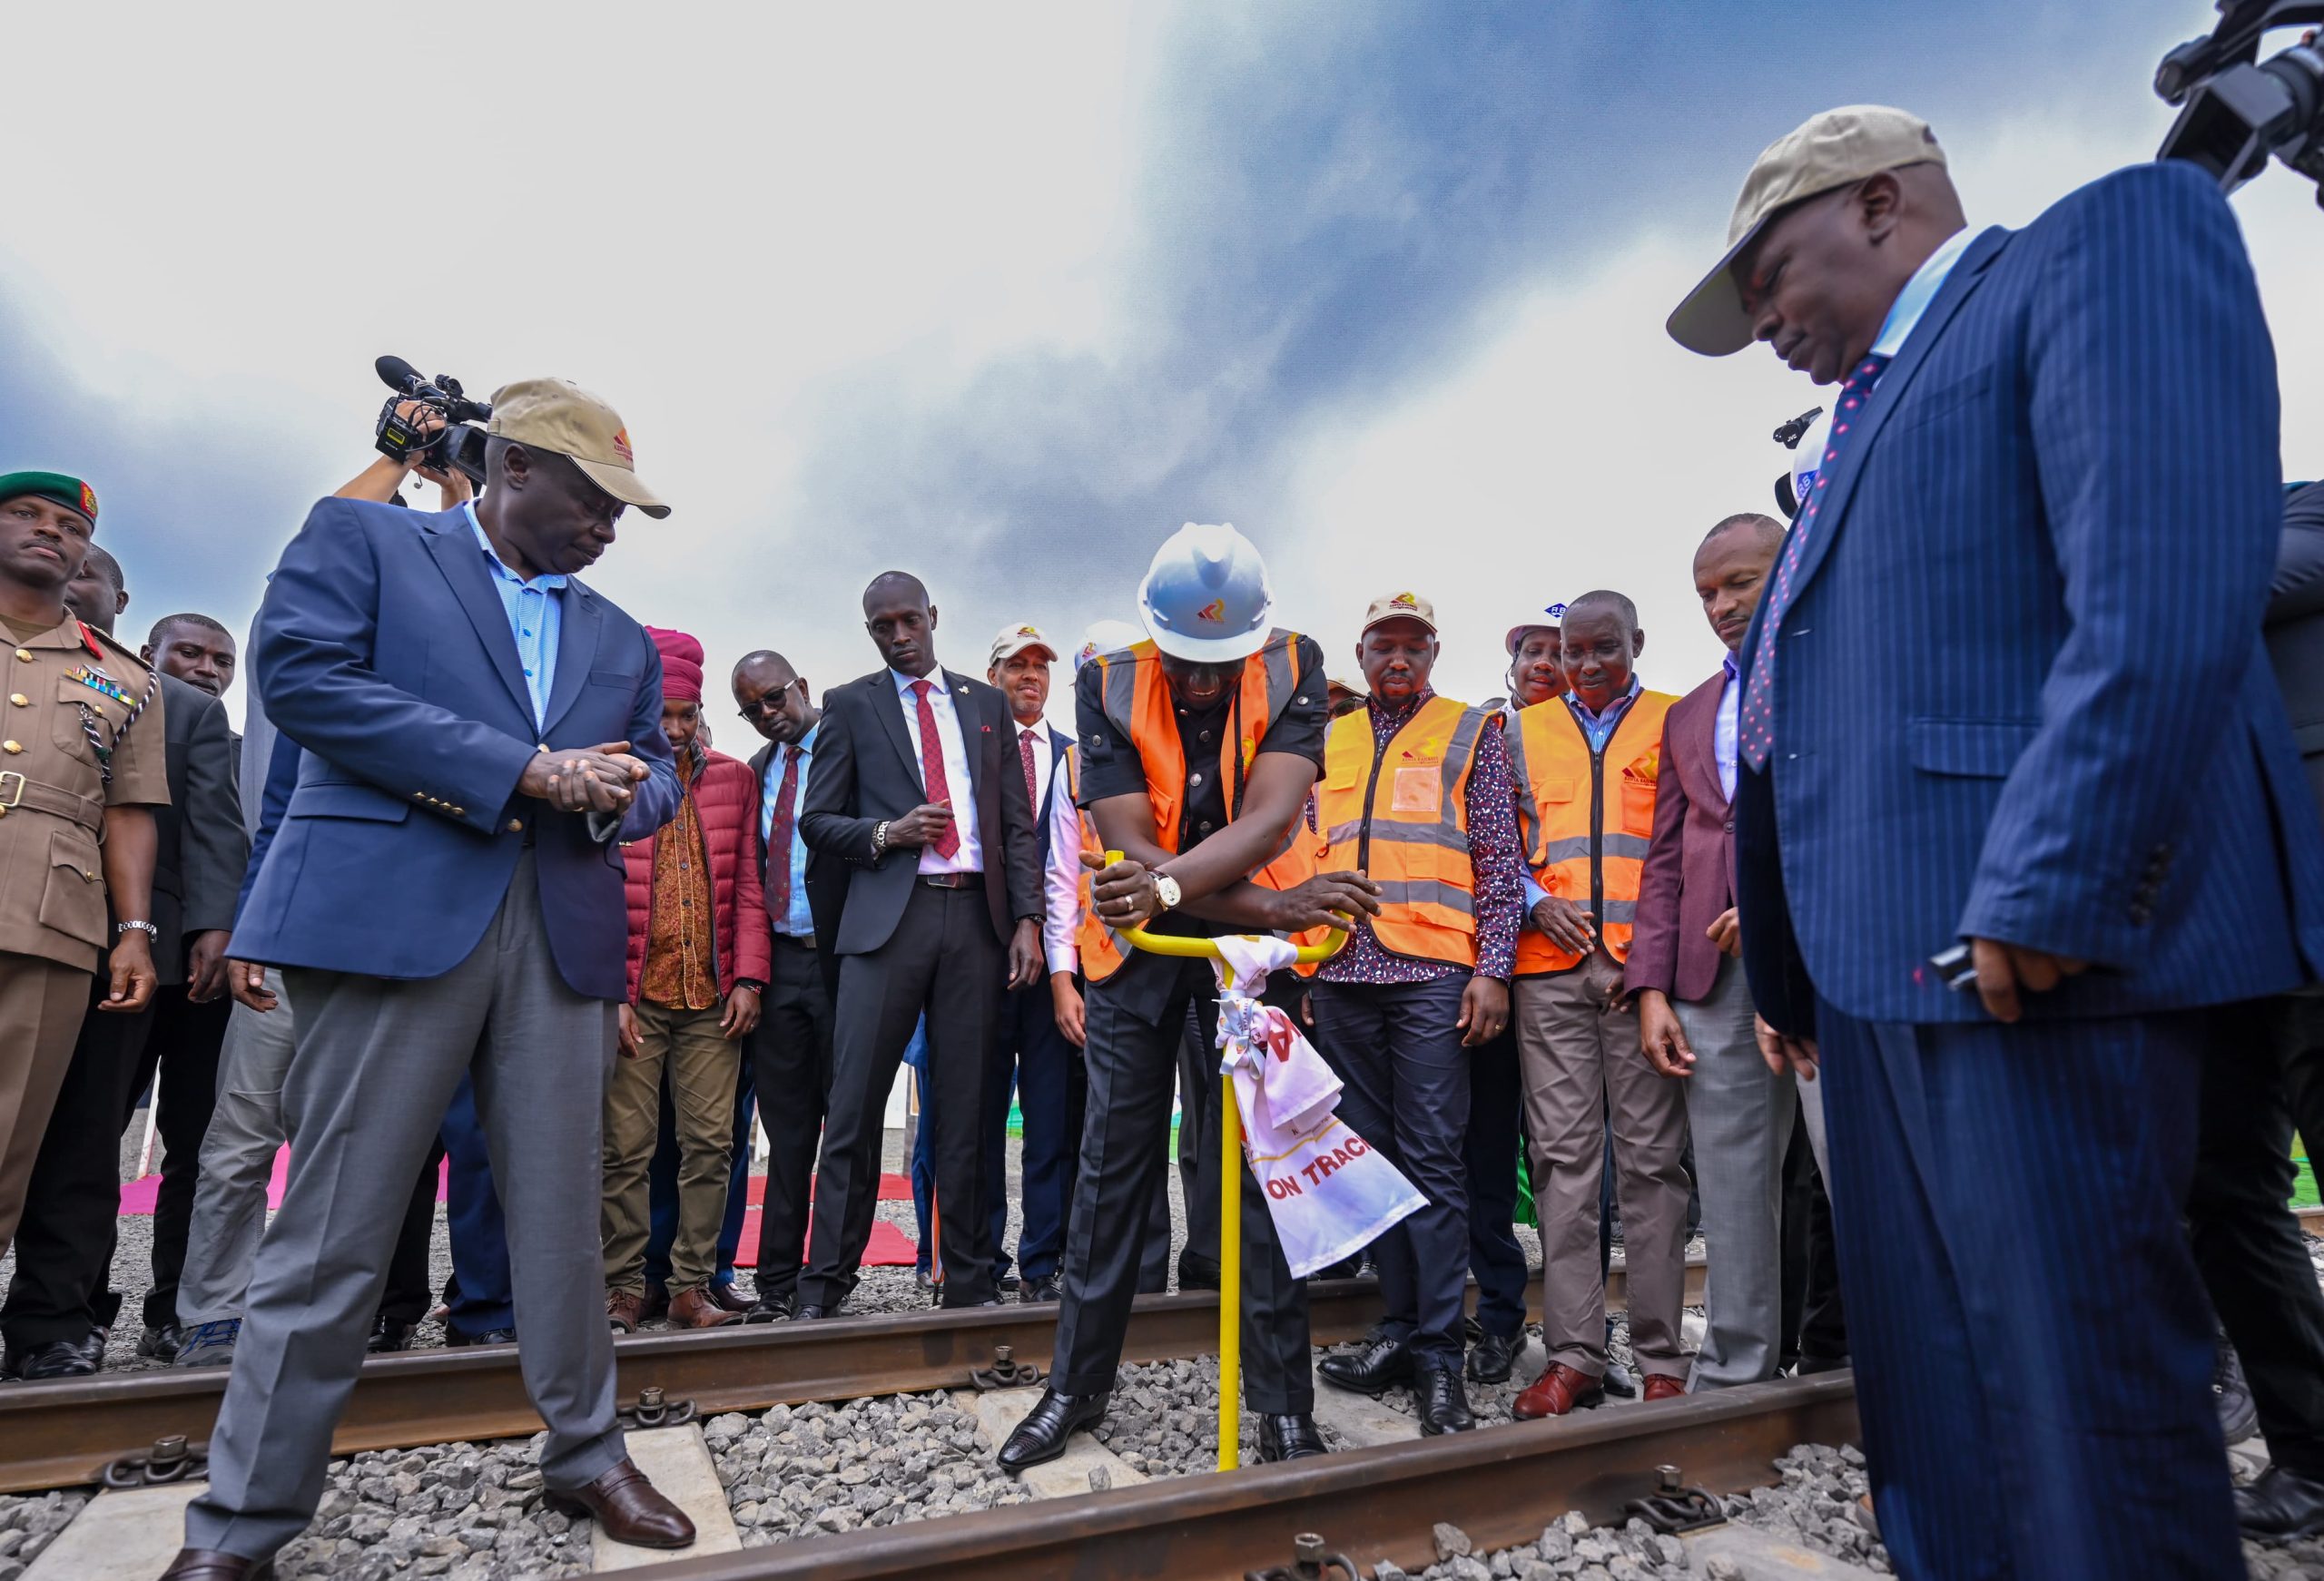 President William Ruto Launches Construction of Riruta-Ngong Commuter Rail Line in Ngong, Kajiado County